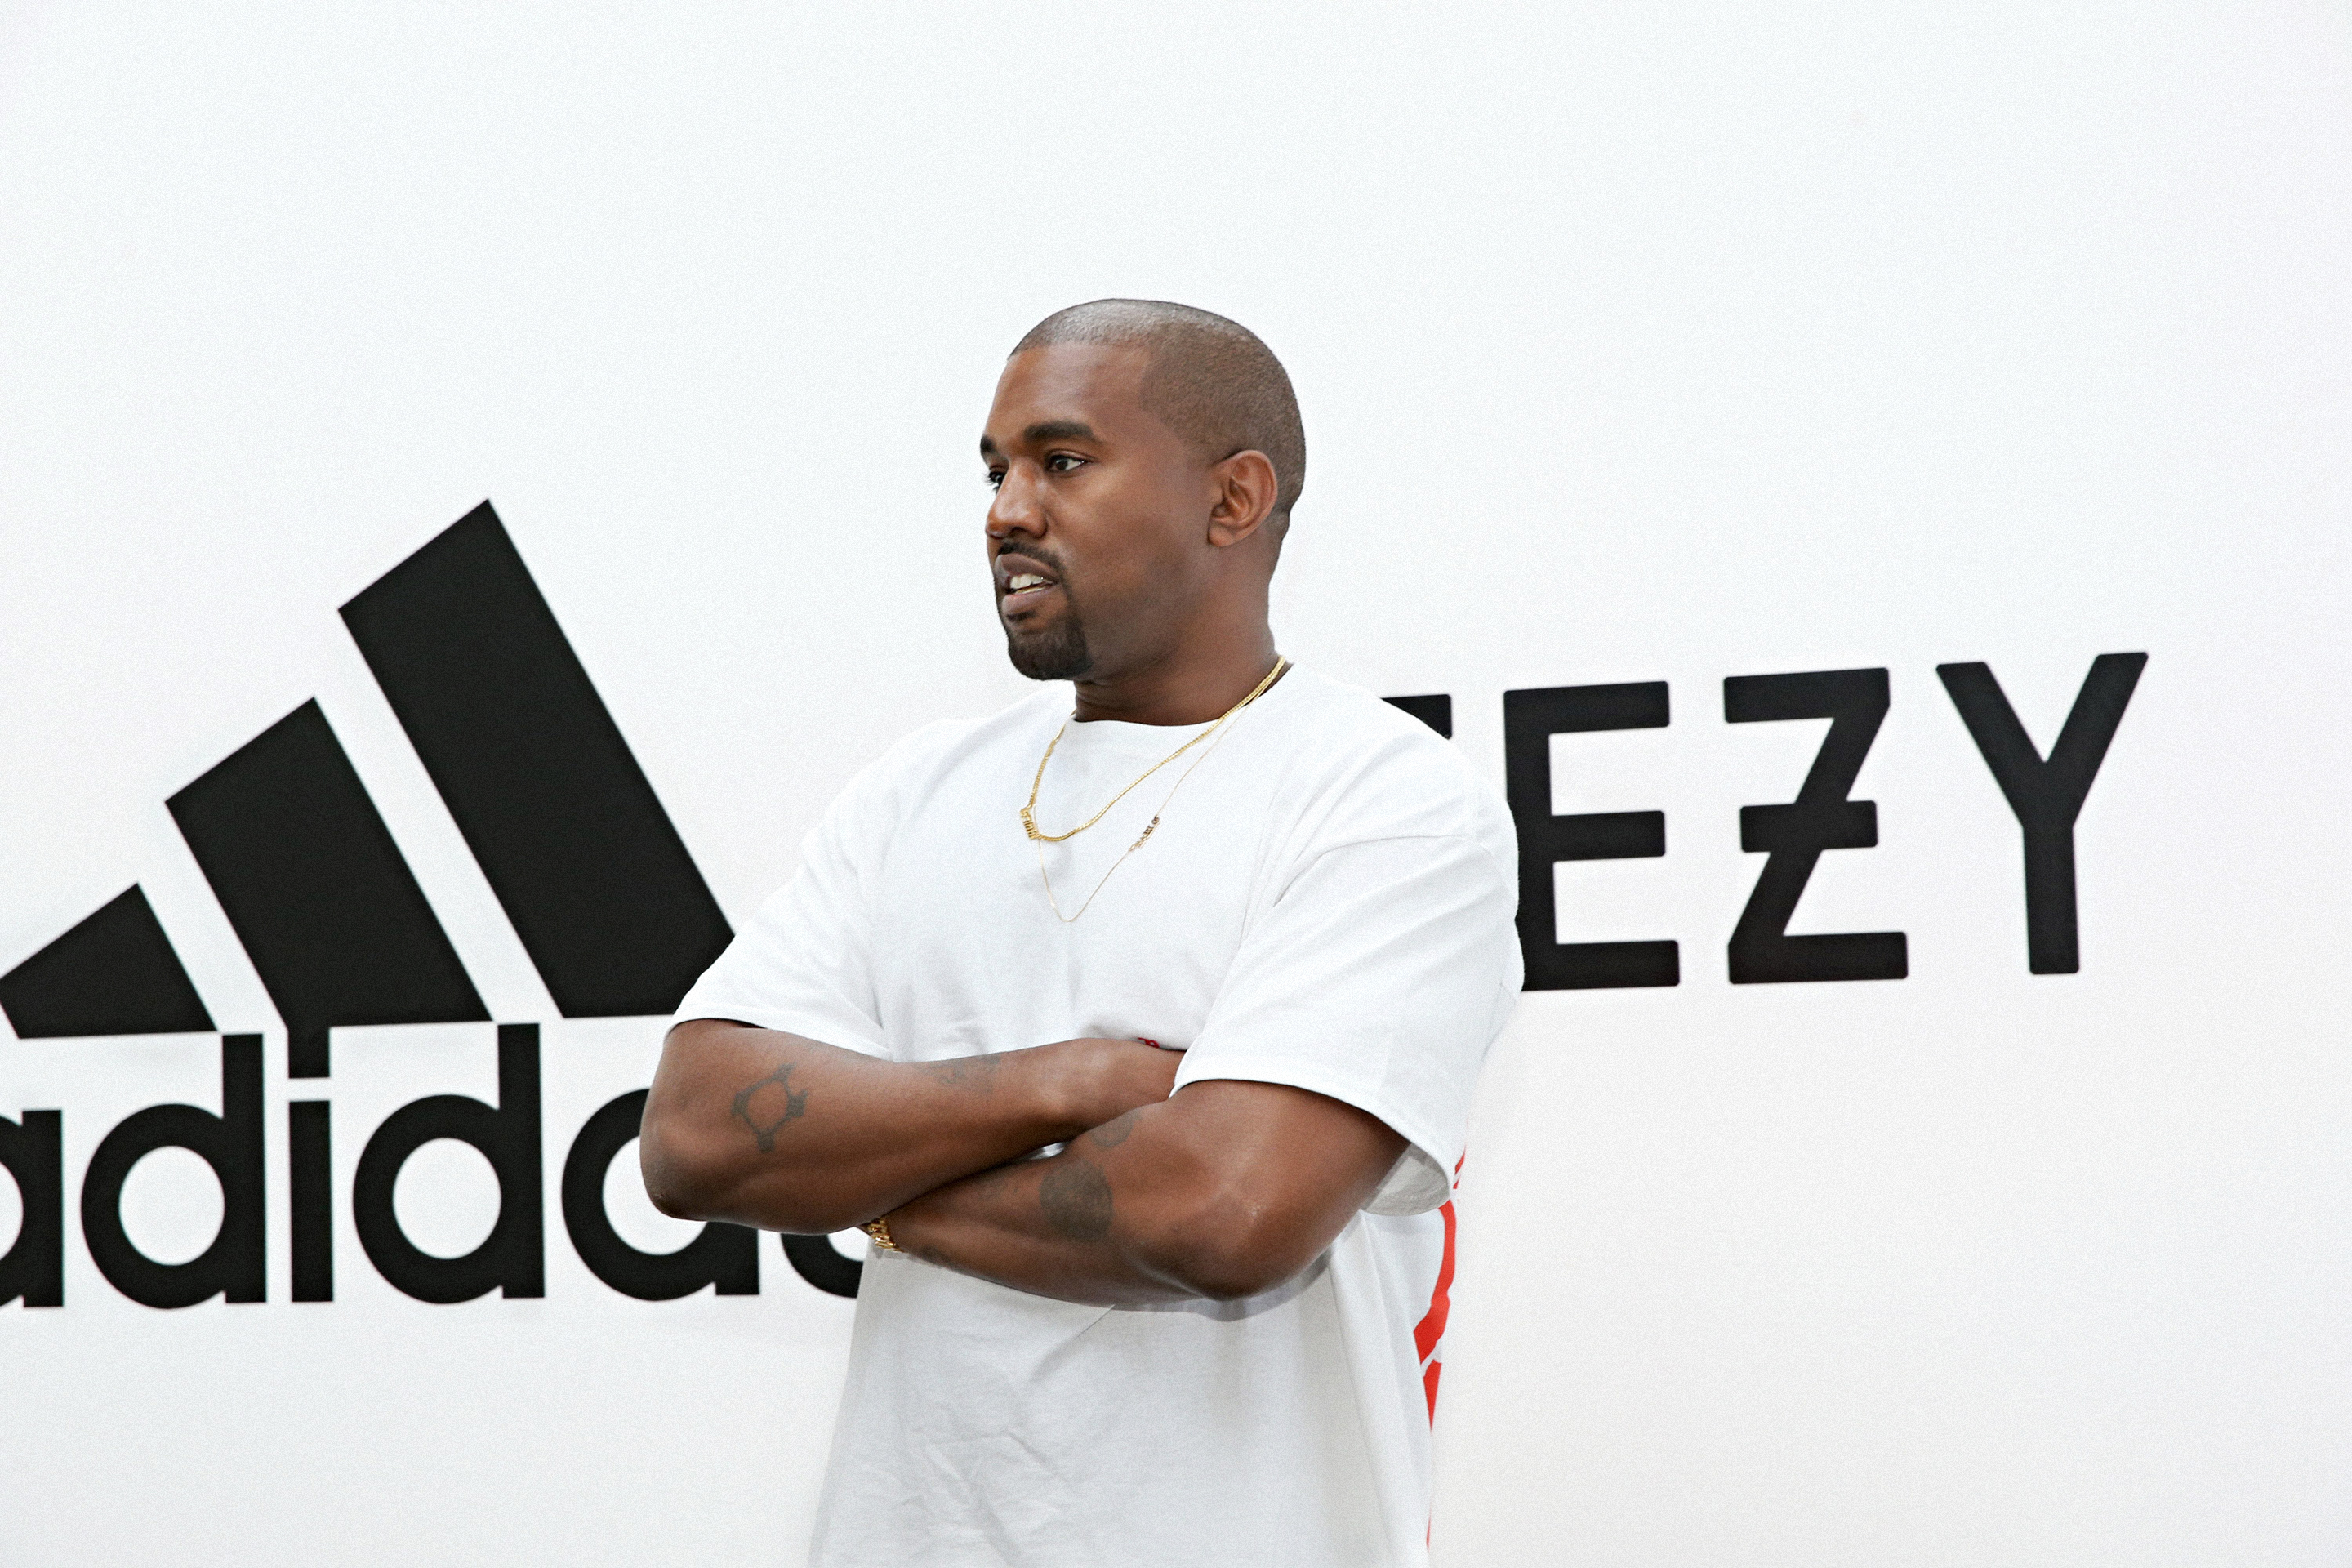 HOLLYWOOD, CA - JUNE 28: Kanye West at Milk Studios on June 28, 2016 in Hollywood, California. adidas and Kanye West announce the future of their partnership: adidas + KANYE WEST (Photo by Jonathan Leibson/Getty Images for ADIDAS)